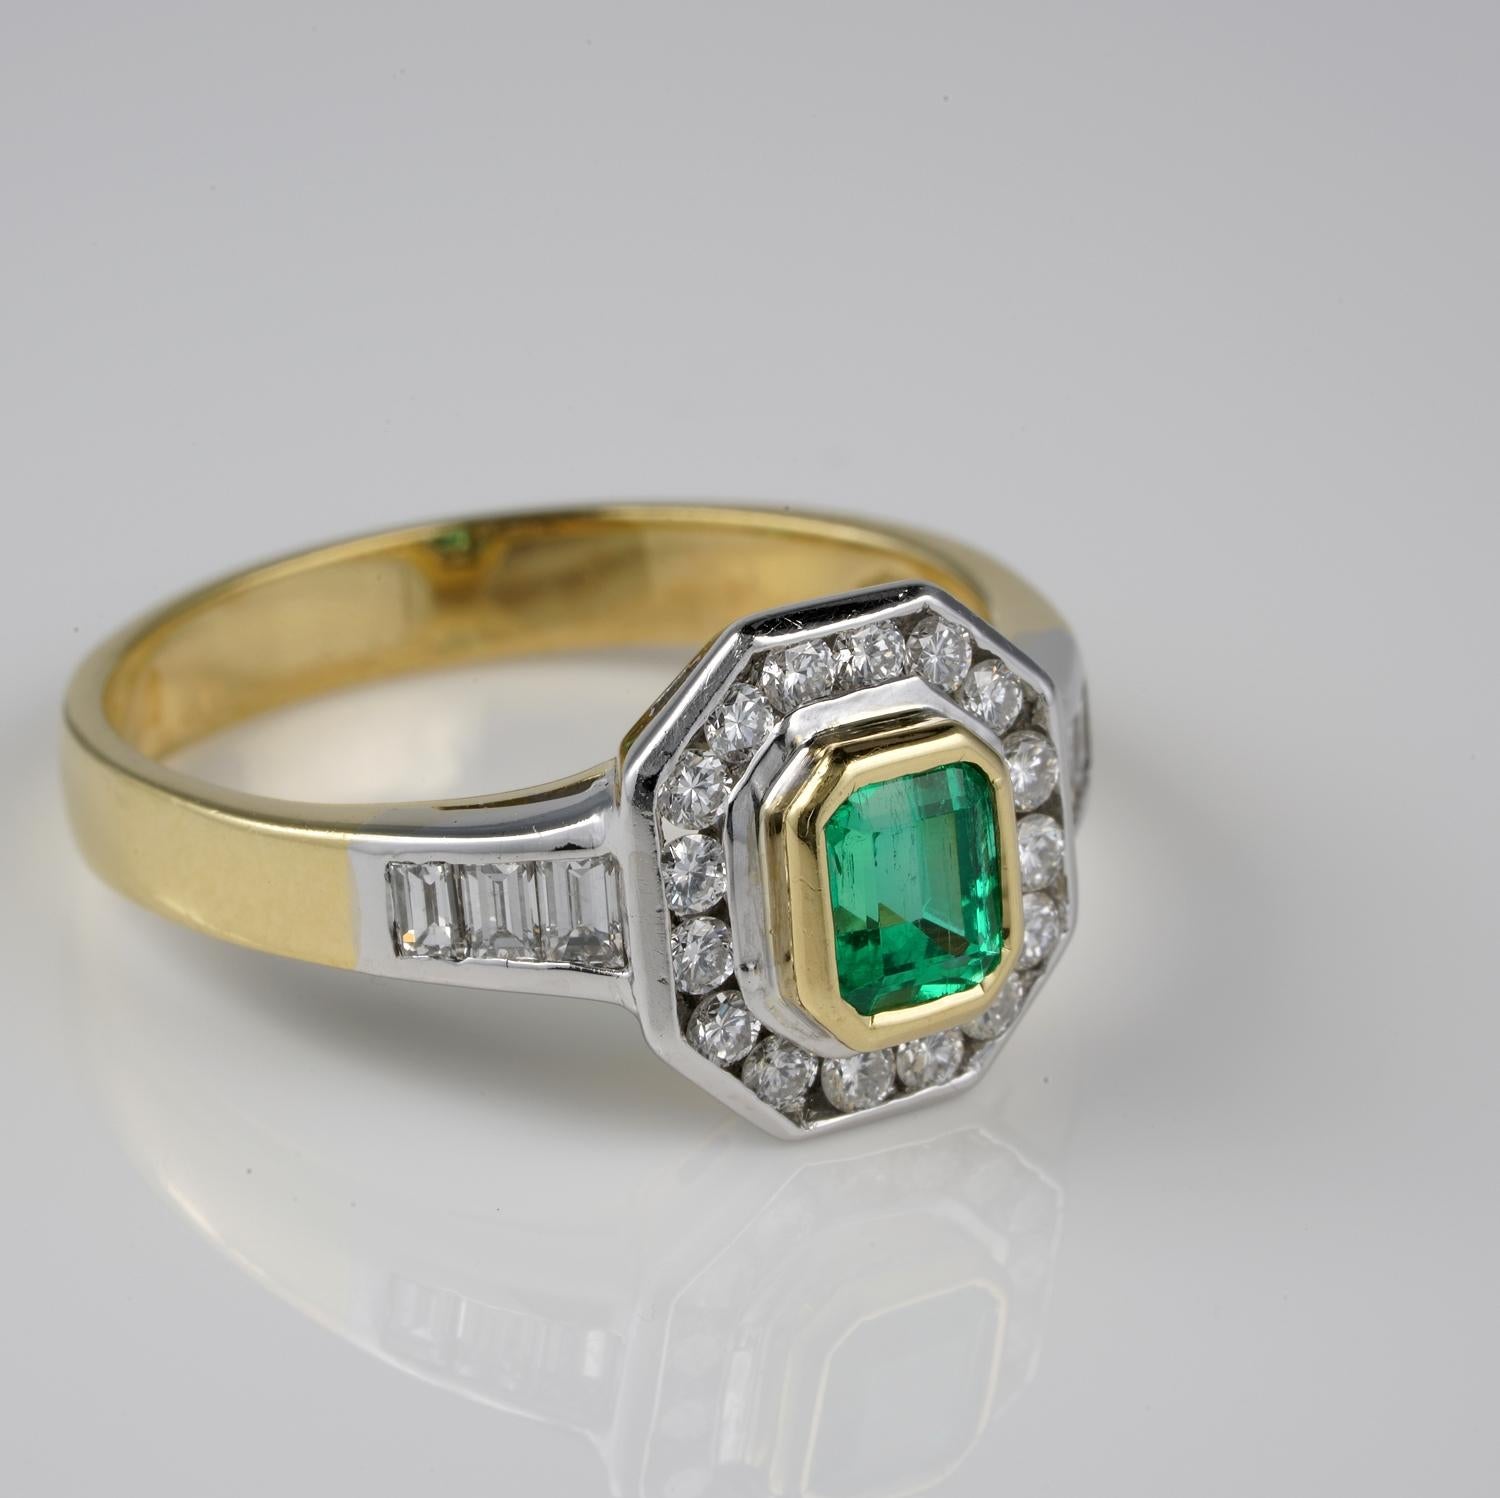 High Quality

This breath taking ring is of the highest quality from start to finish
Superb ever desired design in charming classic octagonal crown with the Emerald as main point richly surrounded by bright white round cut Diamonds and baguette